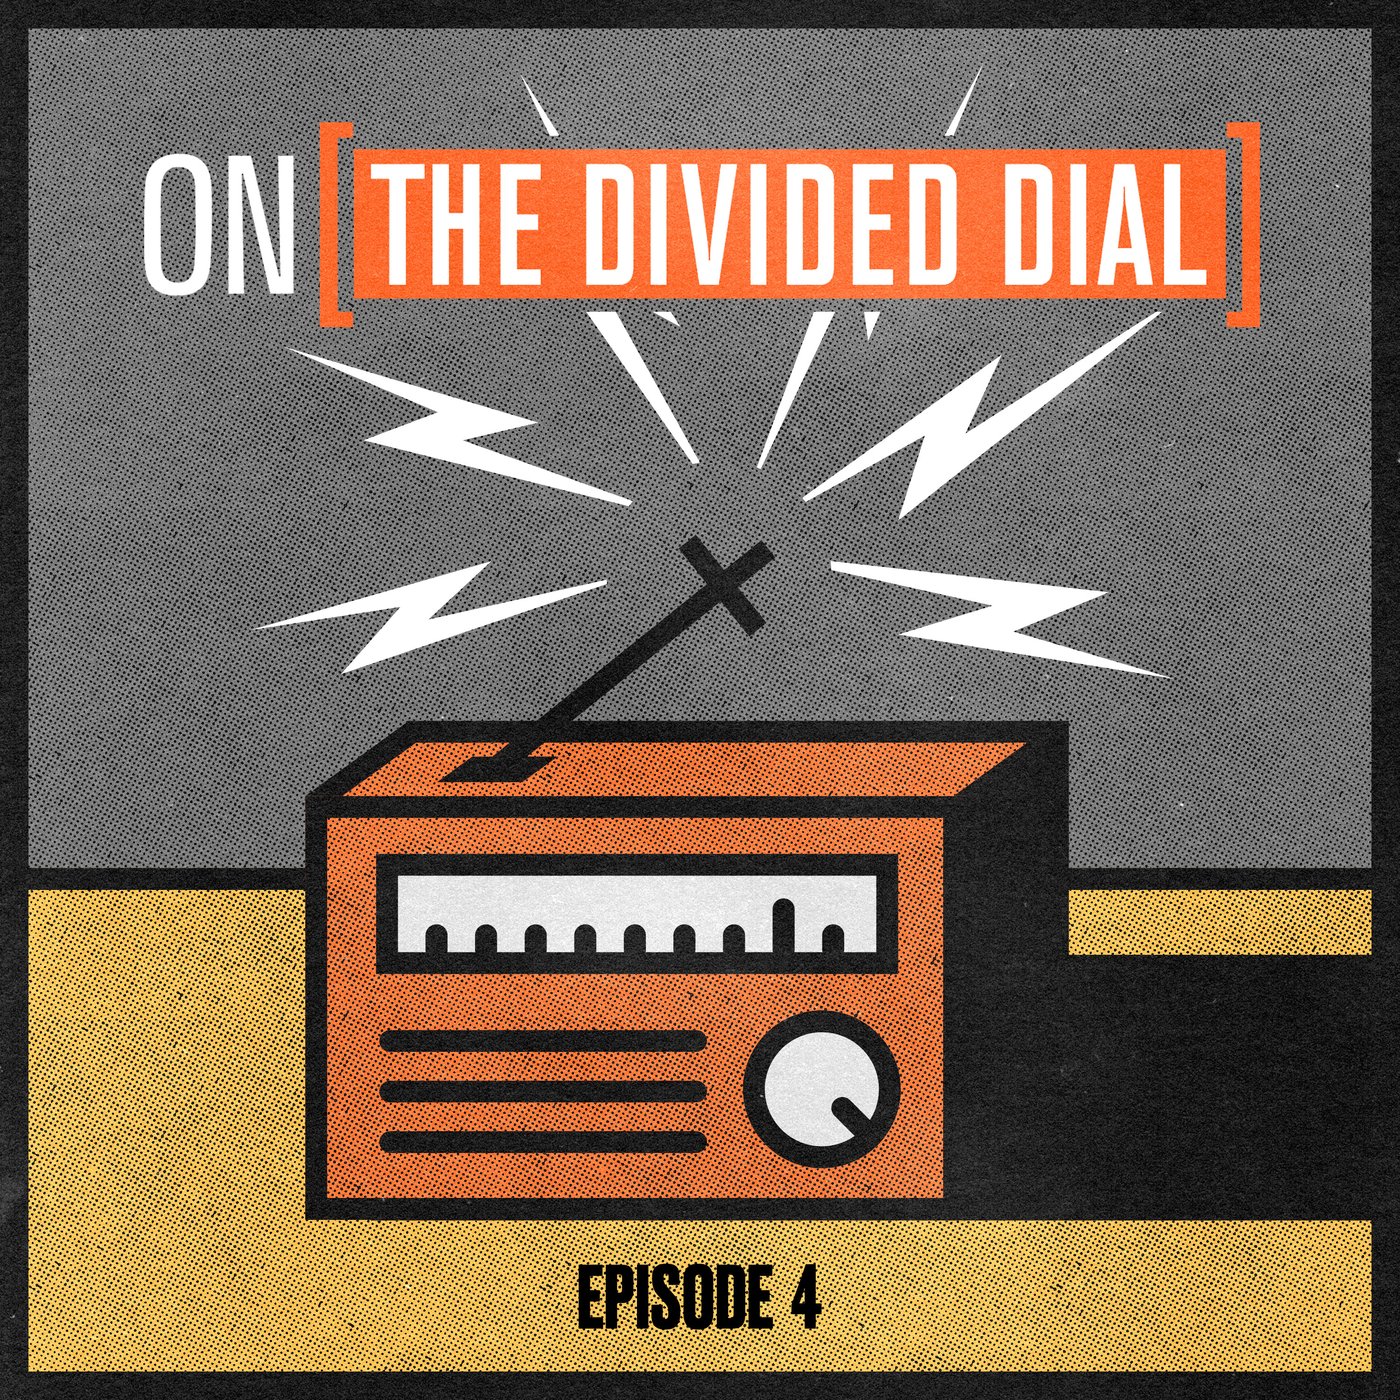 Episode 4 - The Divided Dial